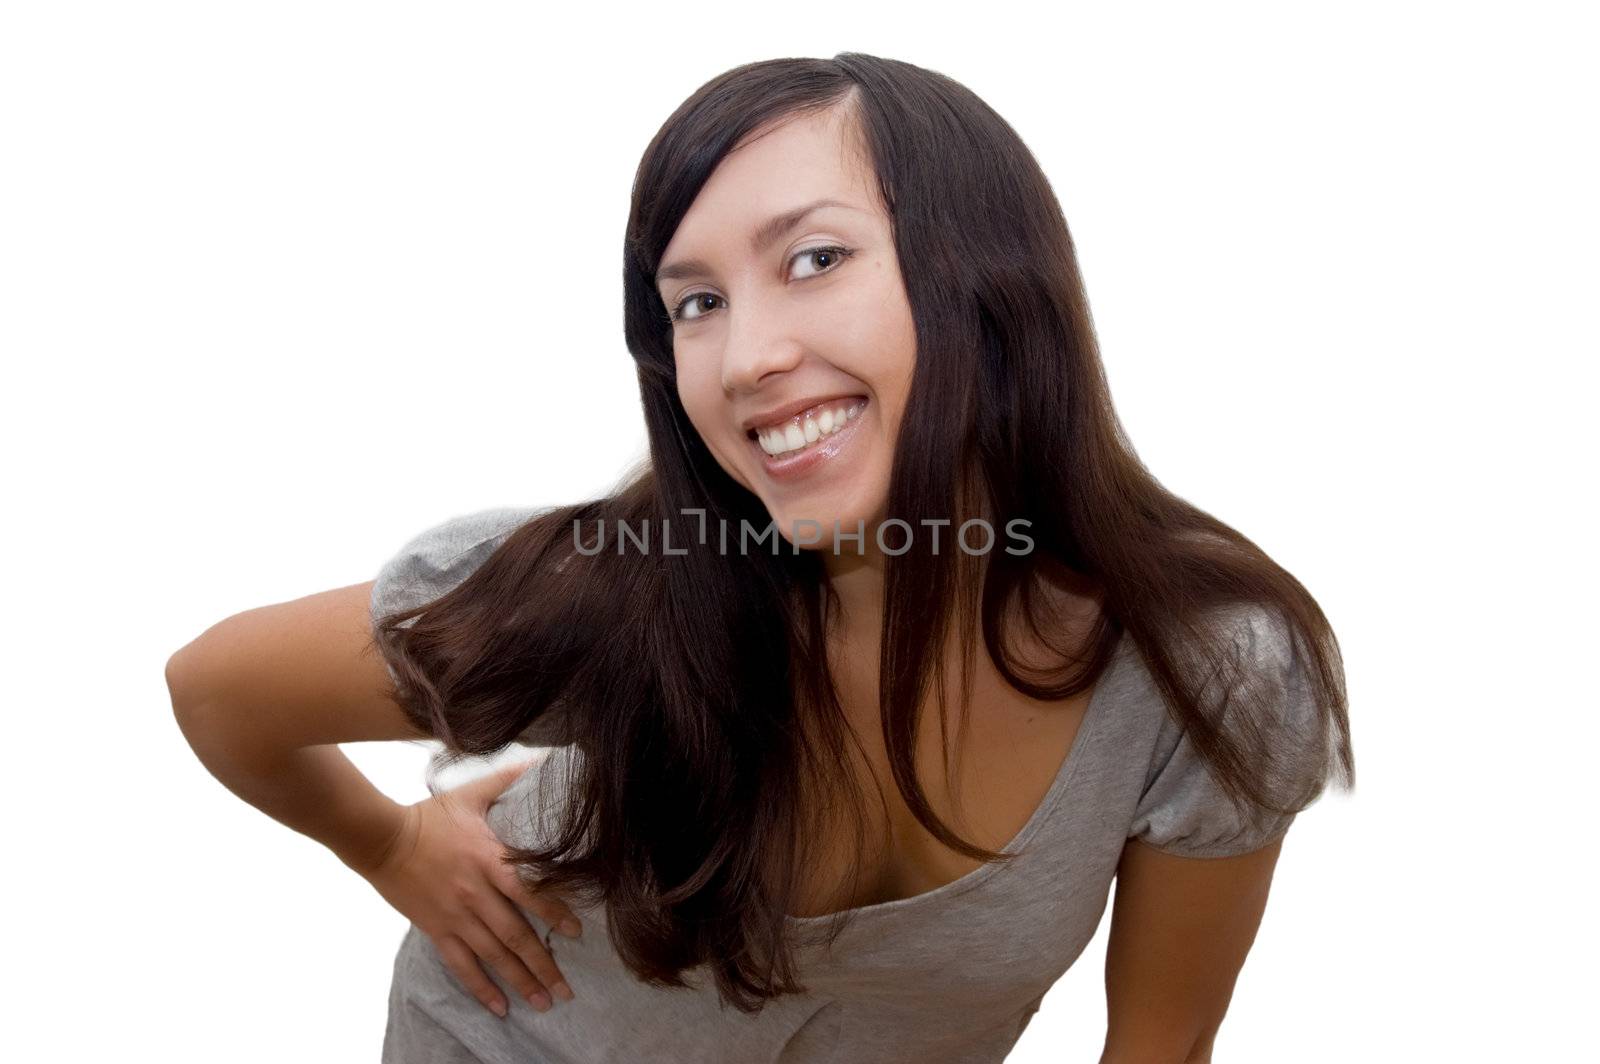 Wide smiling happy brunette over white